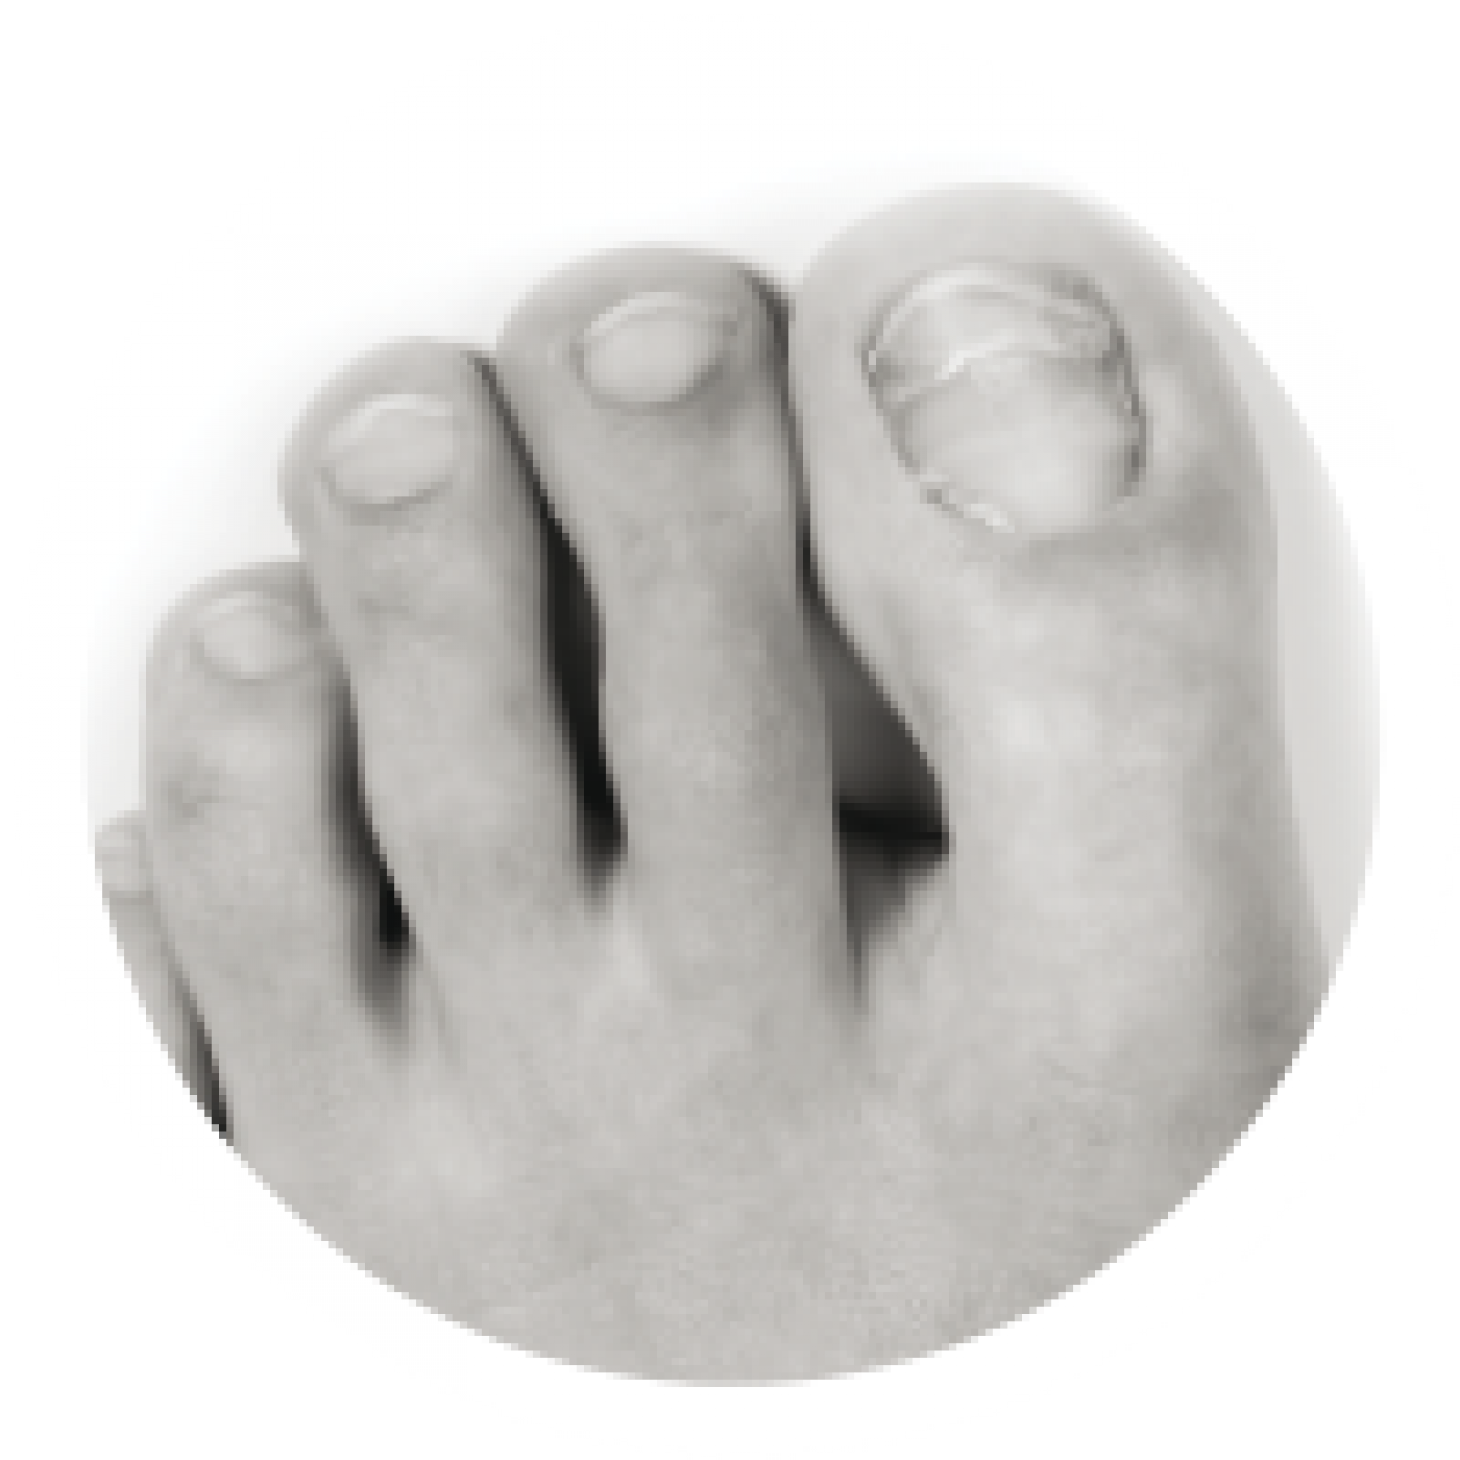 athletes-foot-fungal-nail-conditions, Dalkey Podiatry Clinic can help